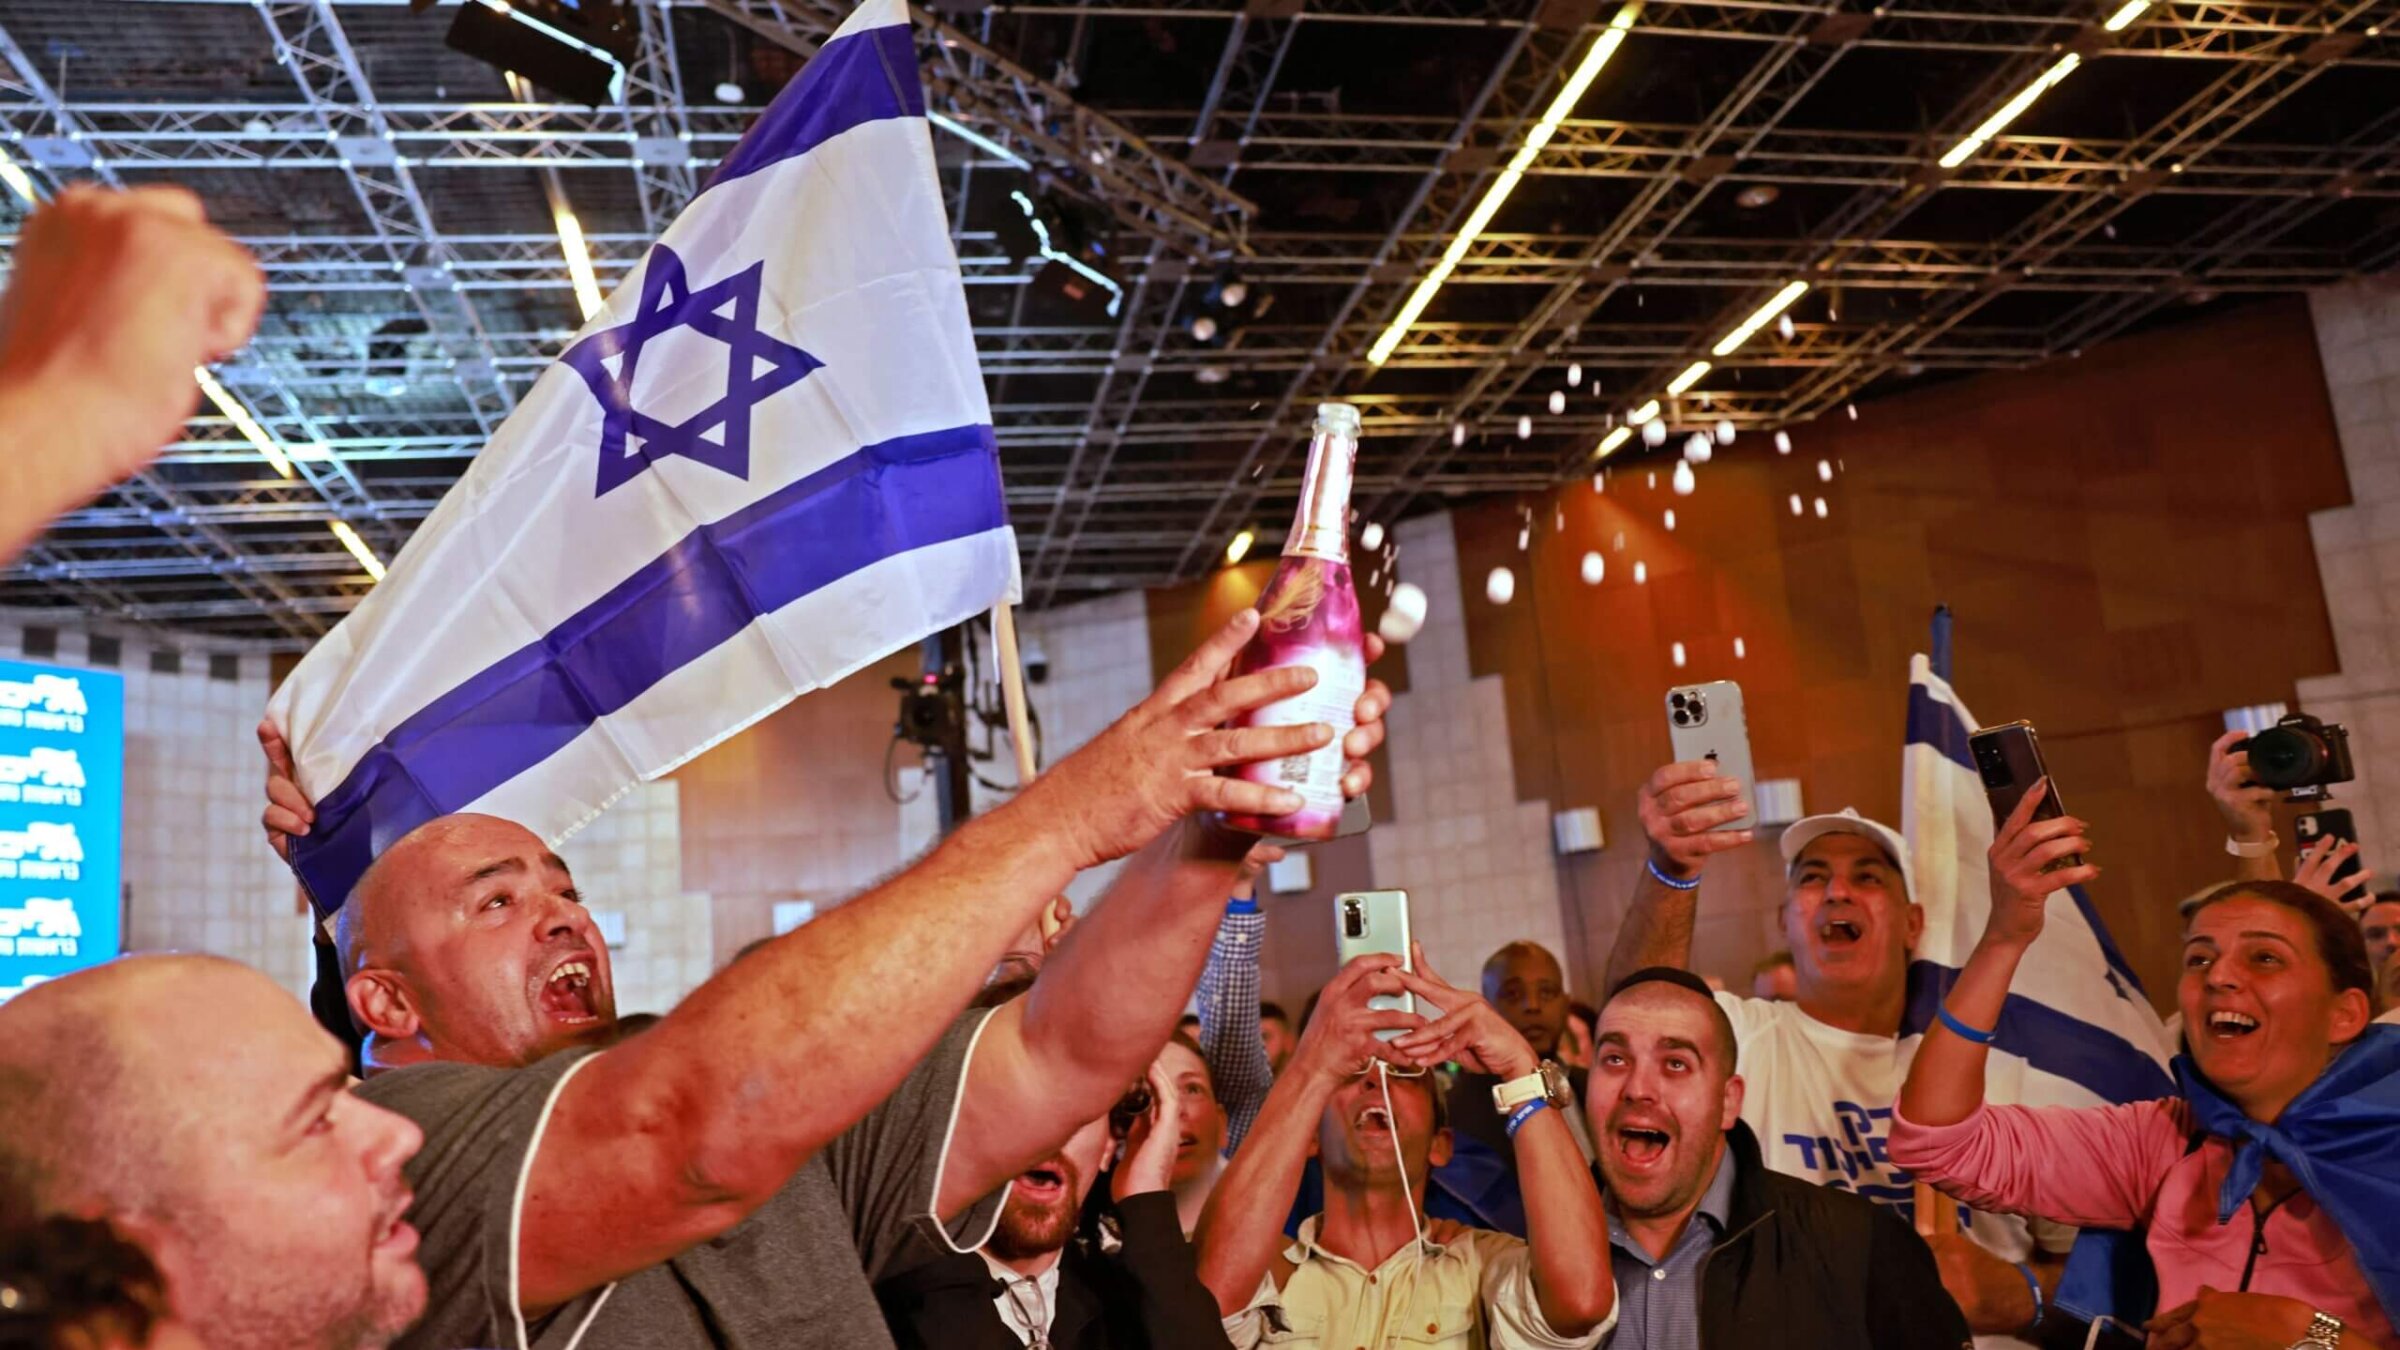 Israel's Likud party supporters gather at their campaign headquarters in Jerusalem on Nov. 1, 2022, after the end of voting in the fifth national election in less than four years.